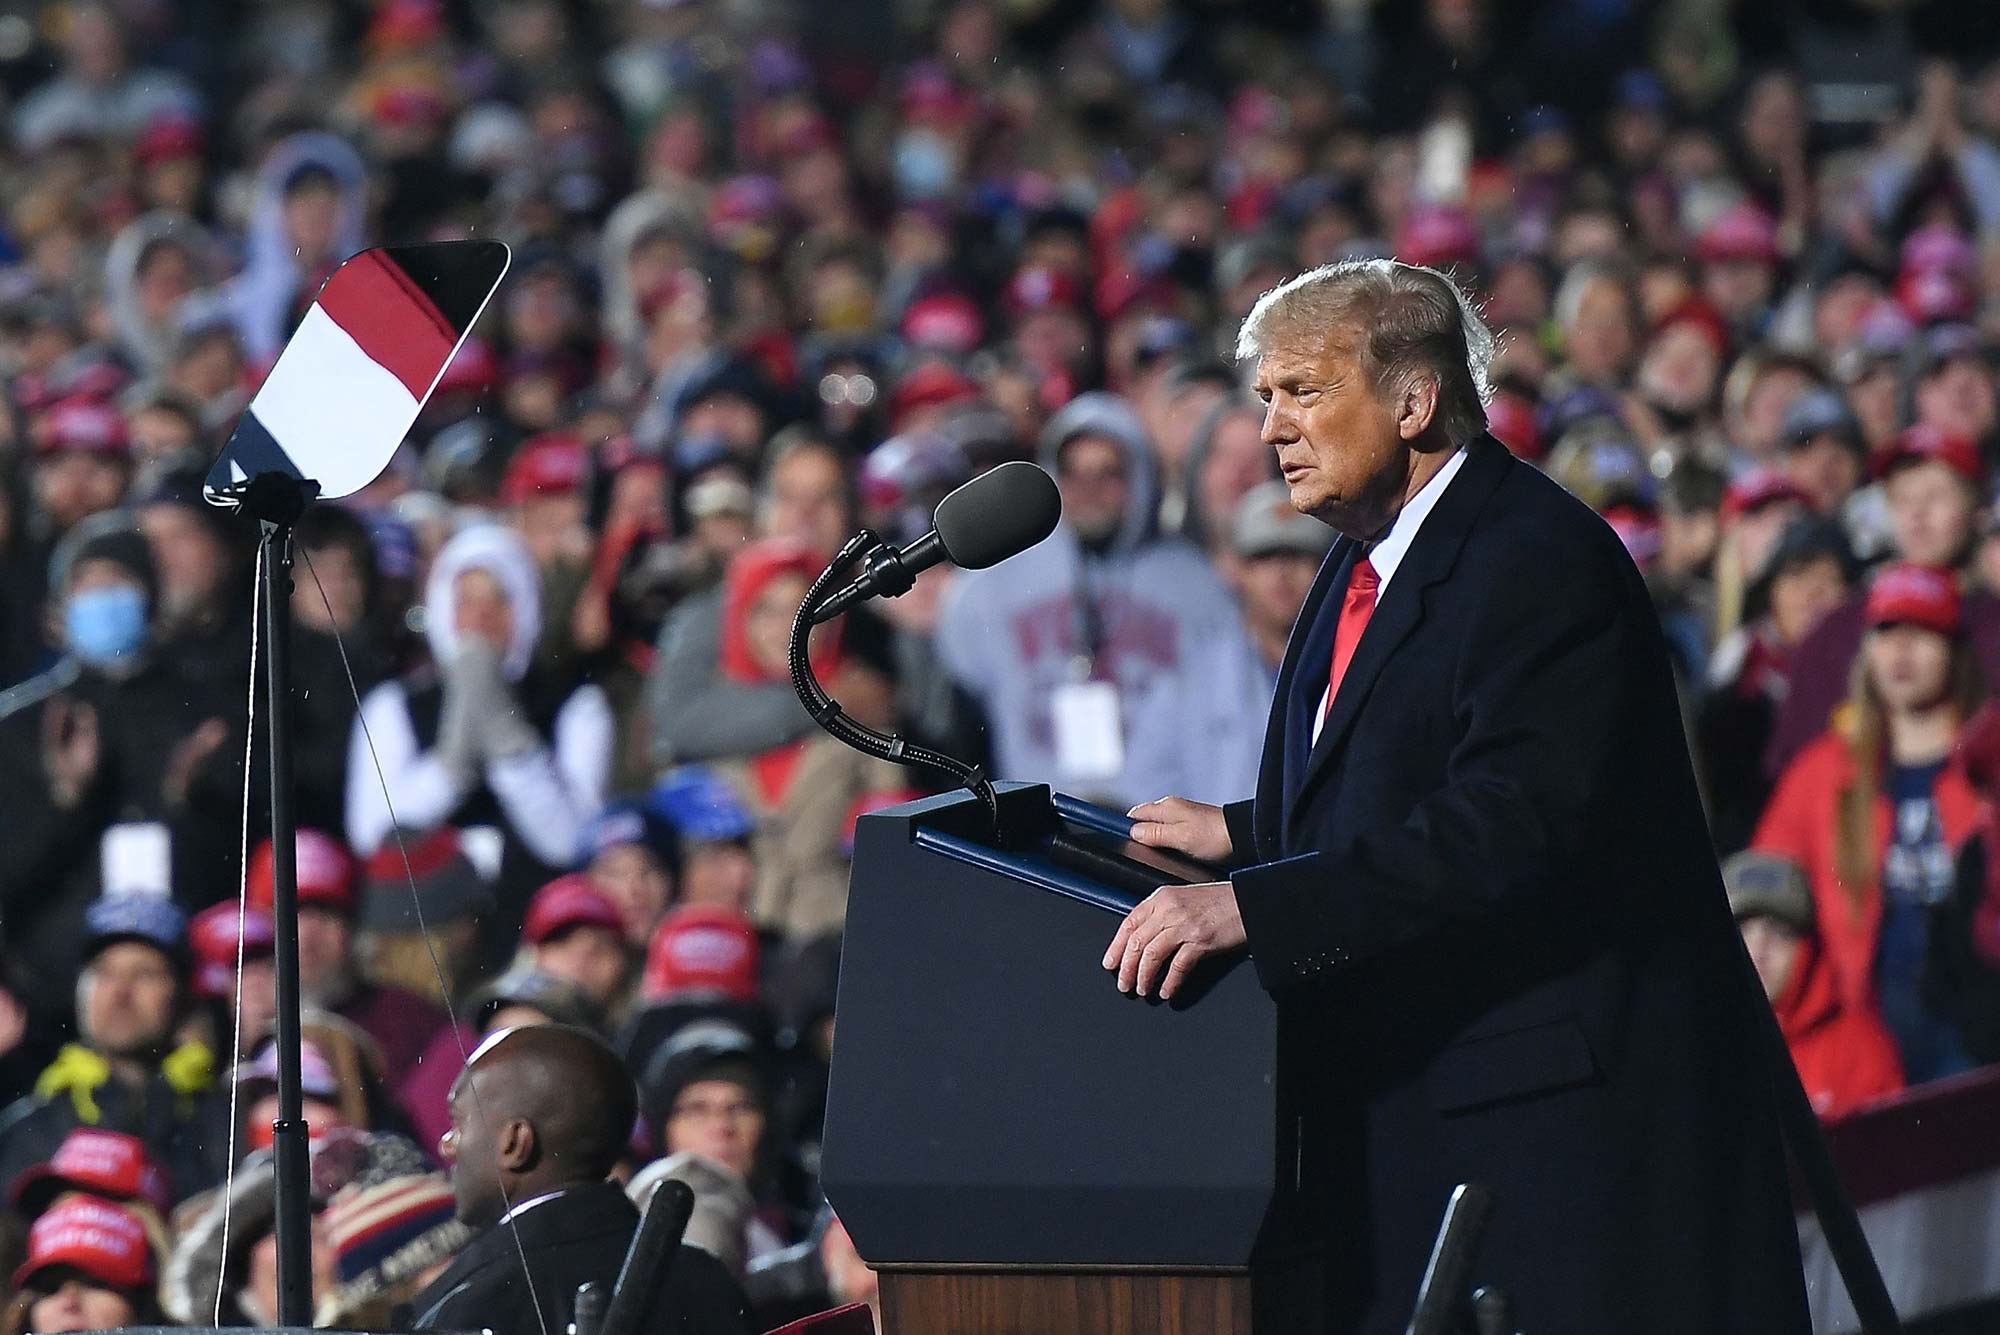 President Donald Trump speaking at at a "Make America Great Again" campaign rally at Duluth International Airport in Duluth, Minnesota, on September 30, 2020.